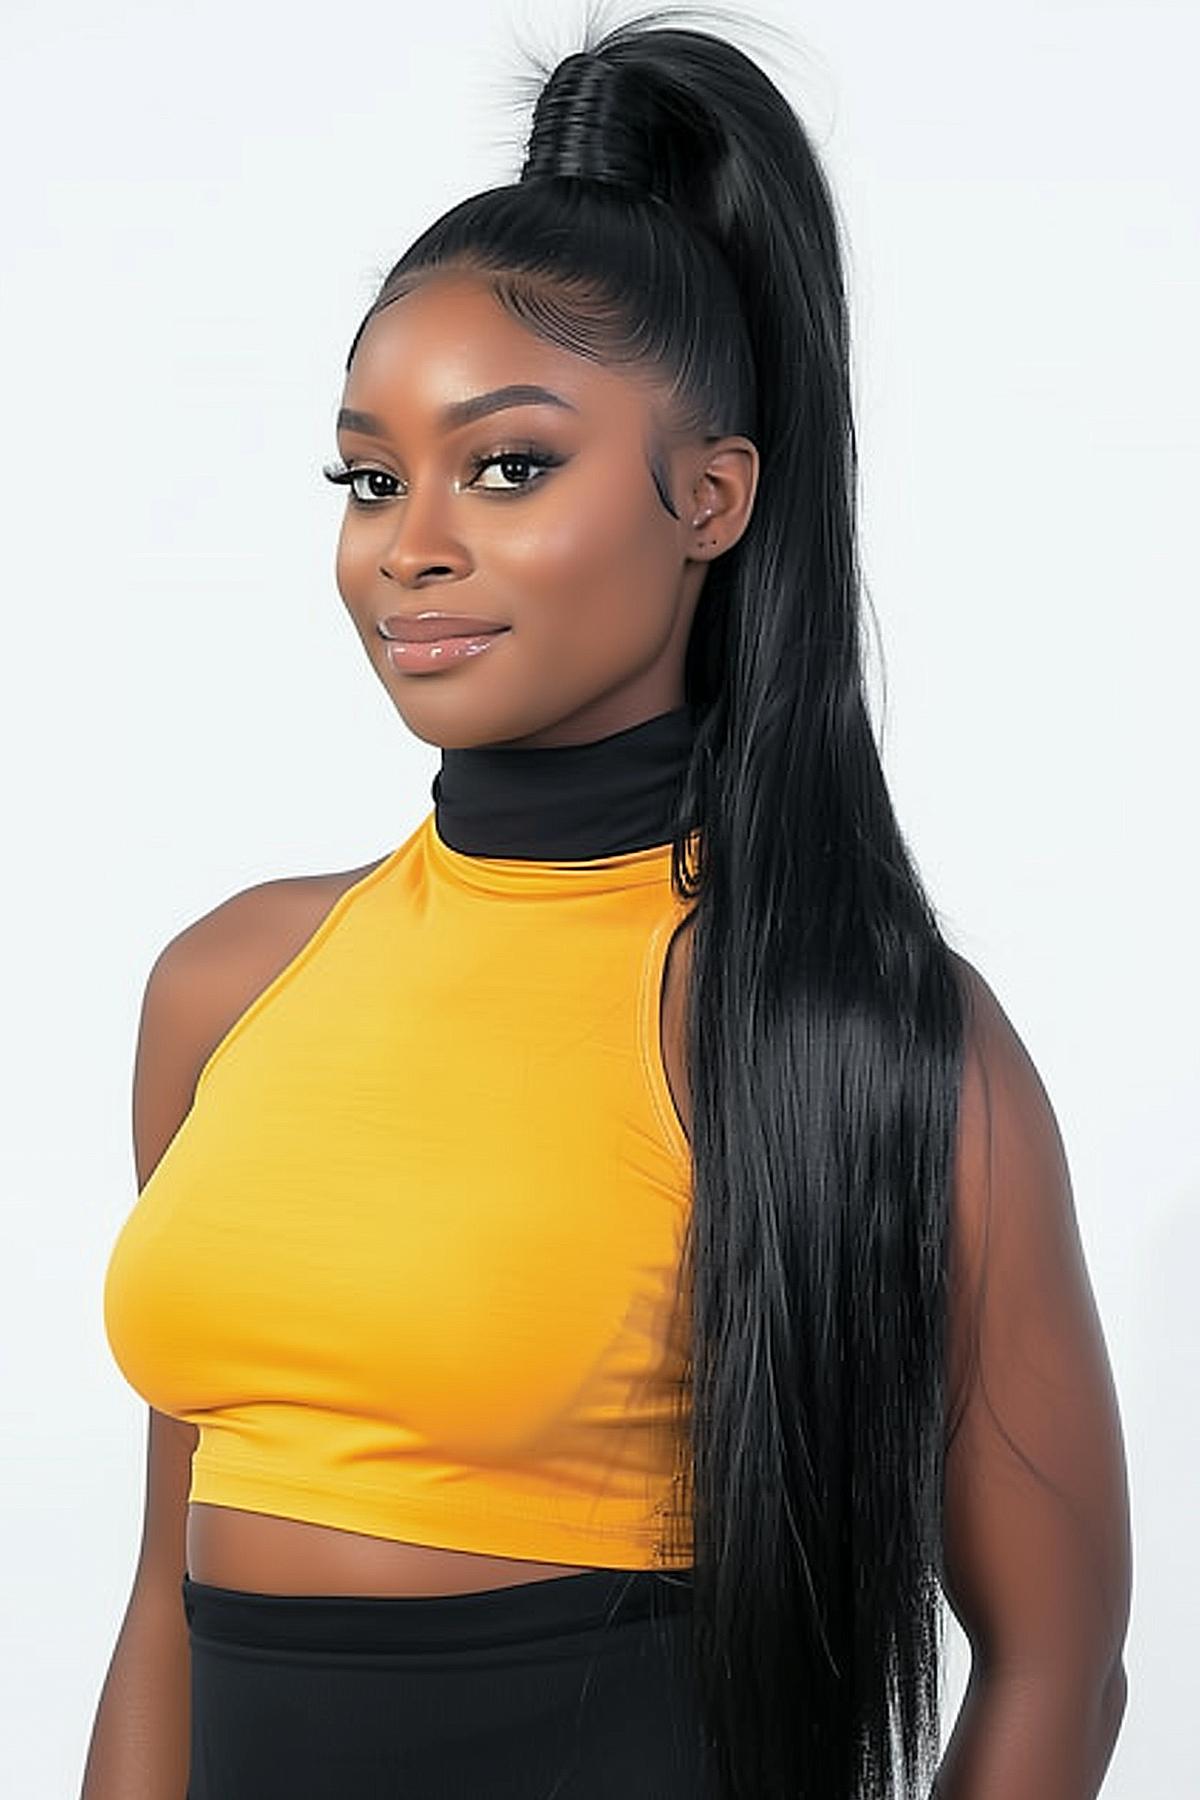 Sleek high quick weave ponytail with clean wrap for African women, perfect for formal settings